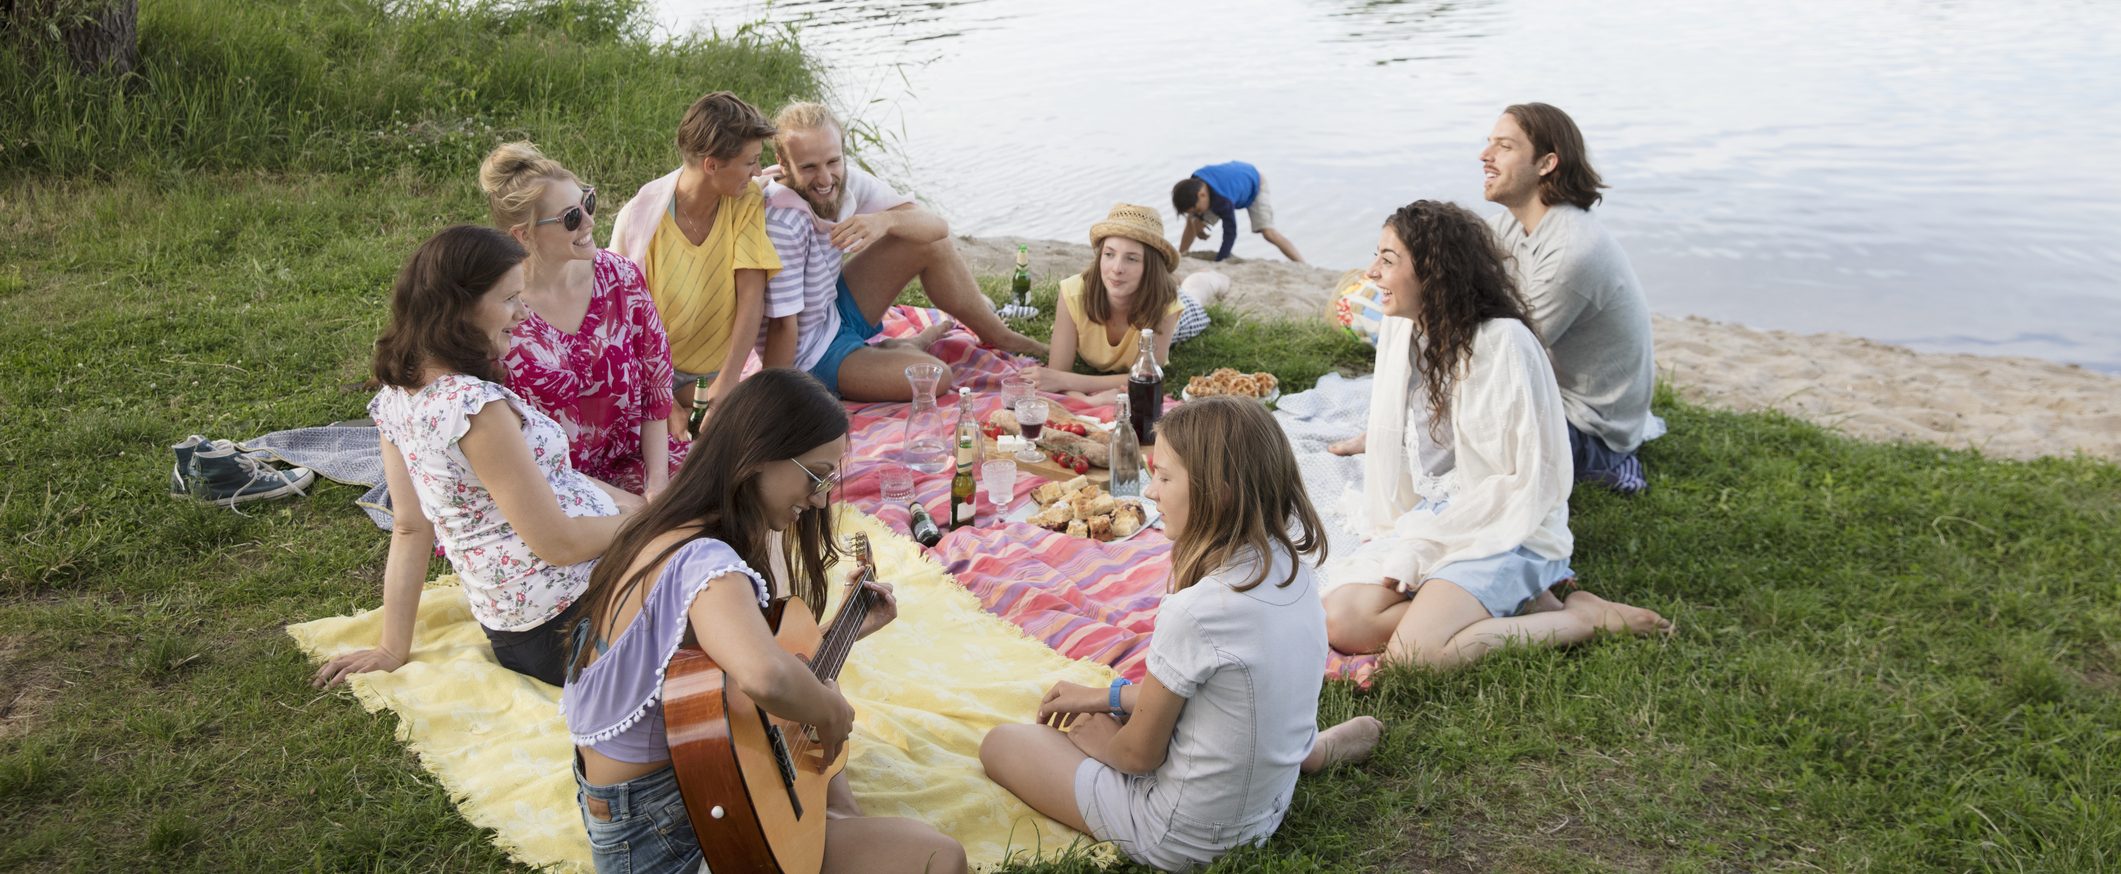 A group of 10 young people enjoying a picnic on grass, near the edge of a lake.